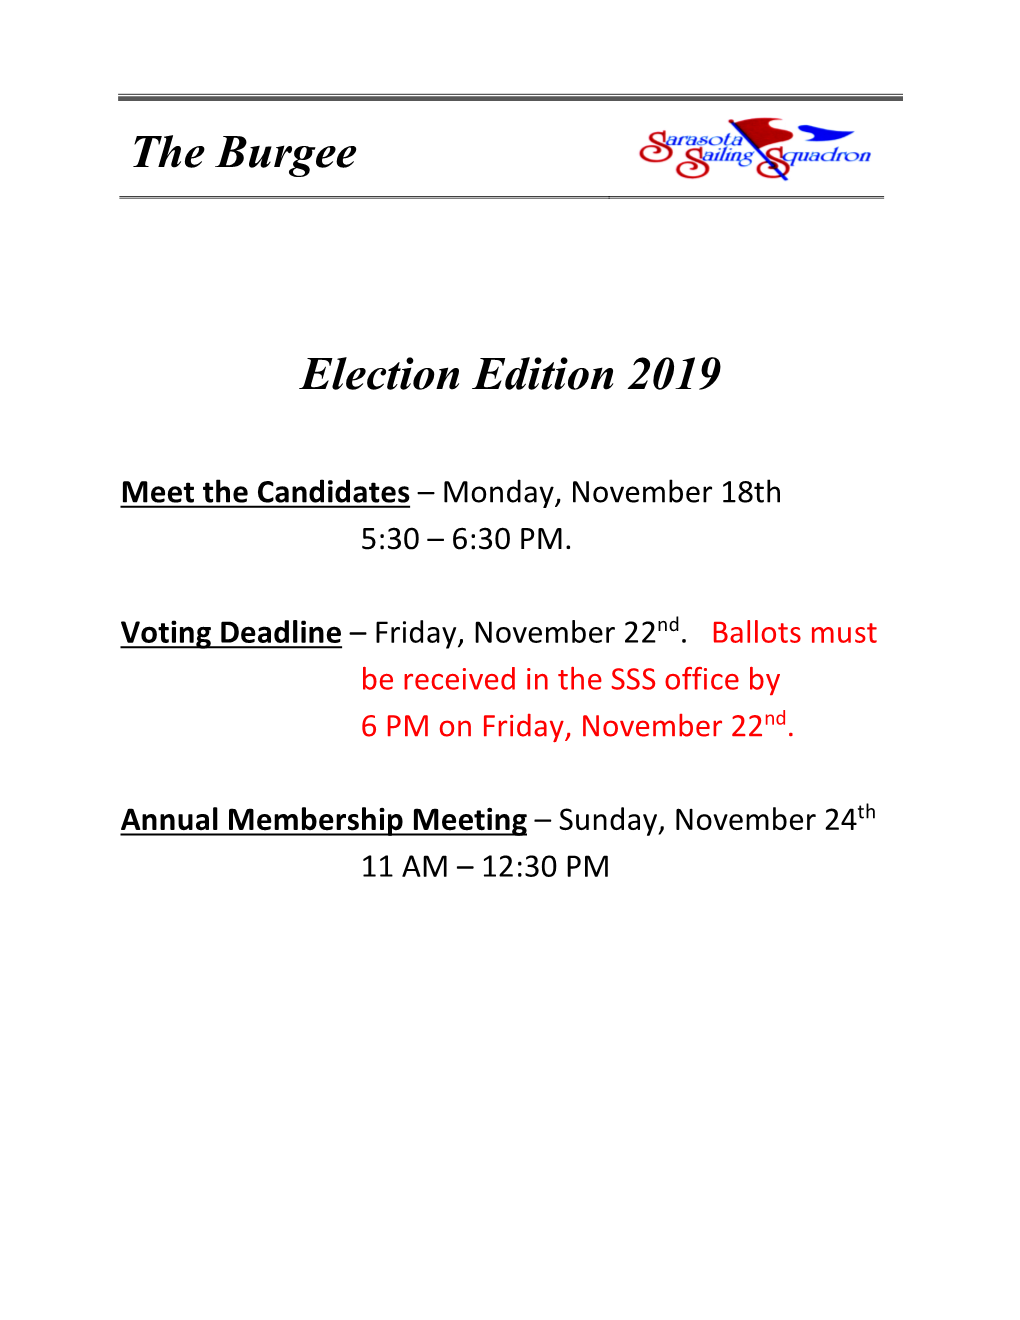 The Burgee – Election Edition 2019